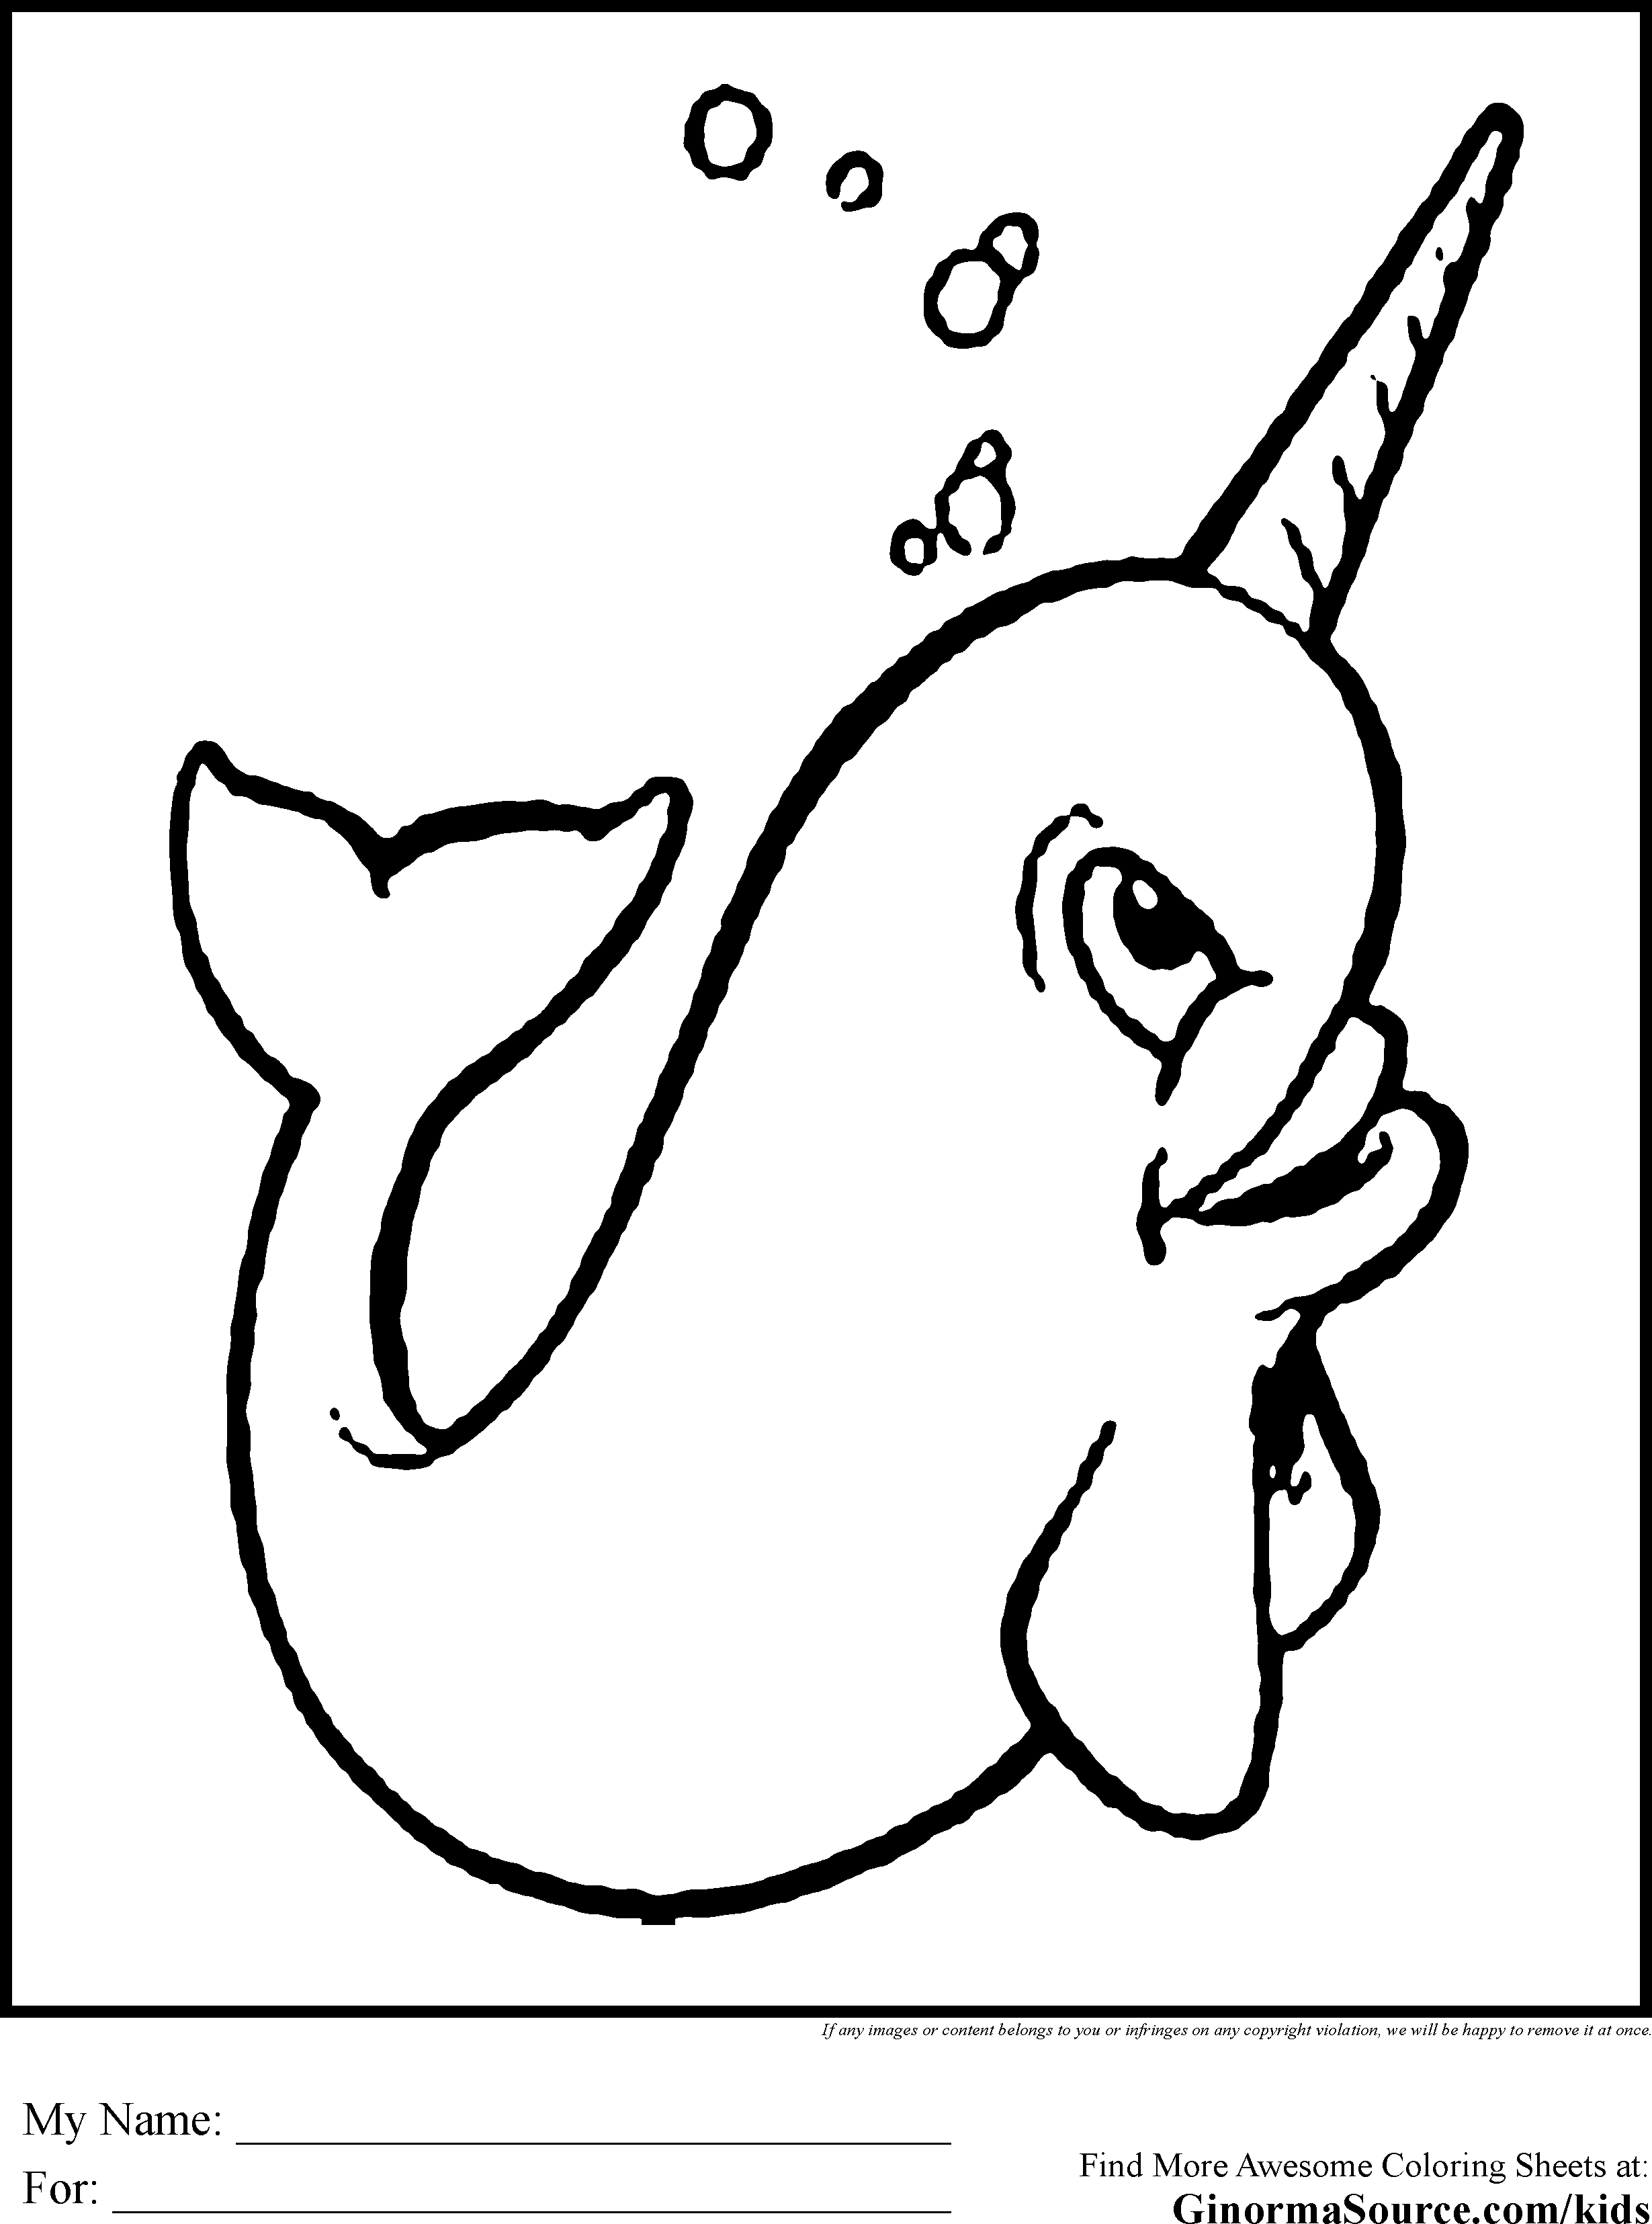 narwhal coloring page n is for narwhal coloring page coloringcom coloring narwhal page 